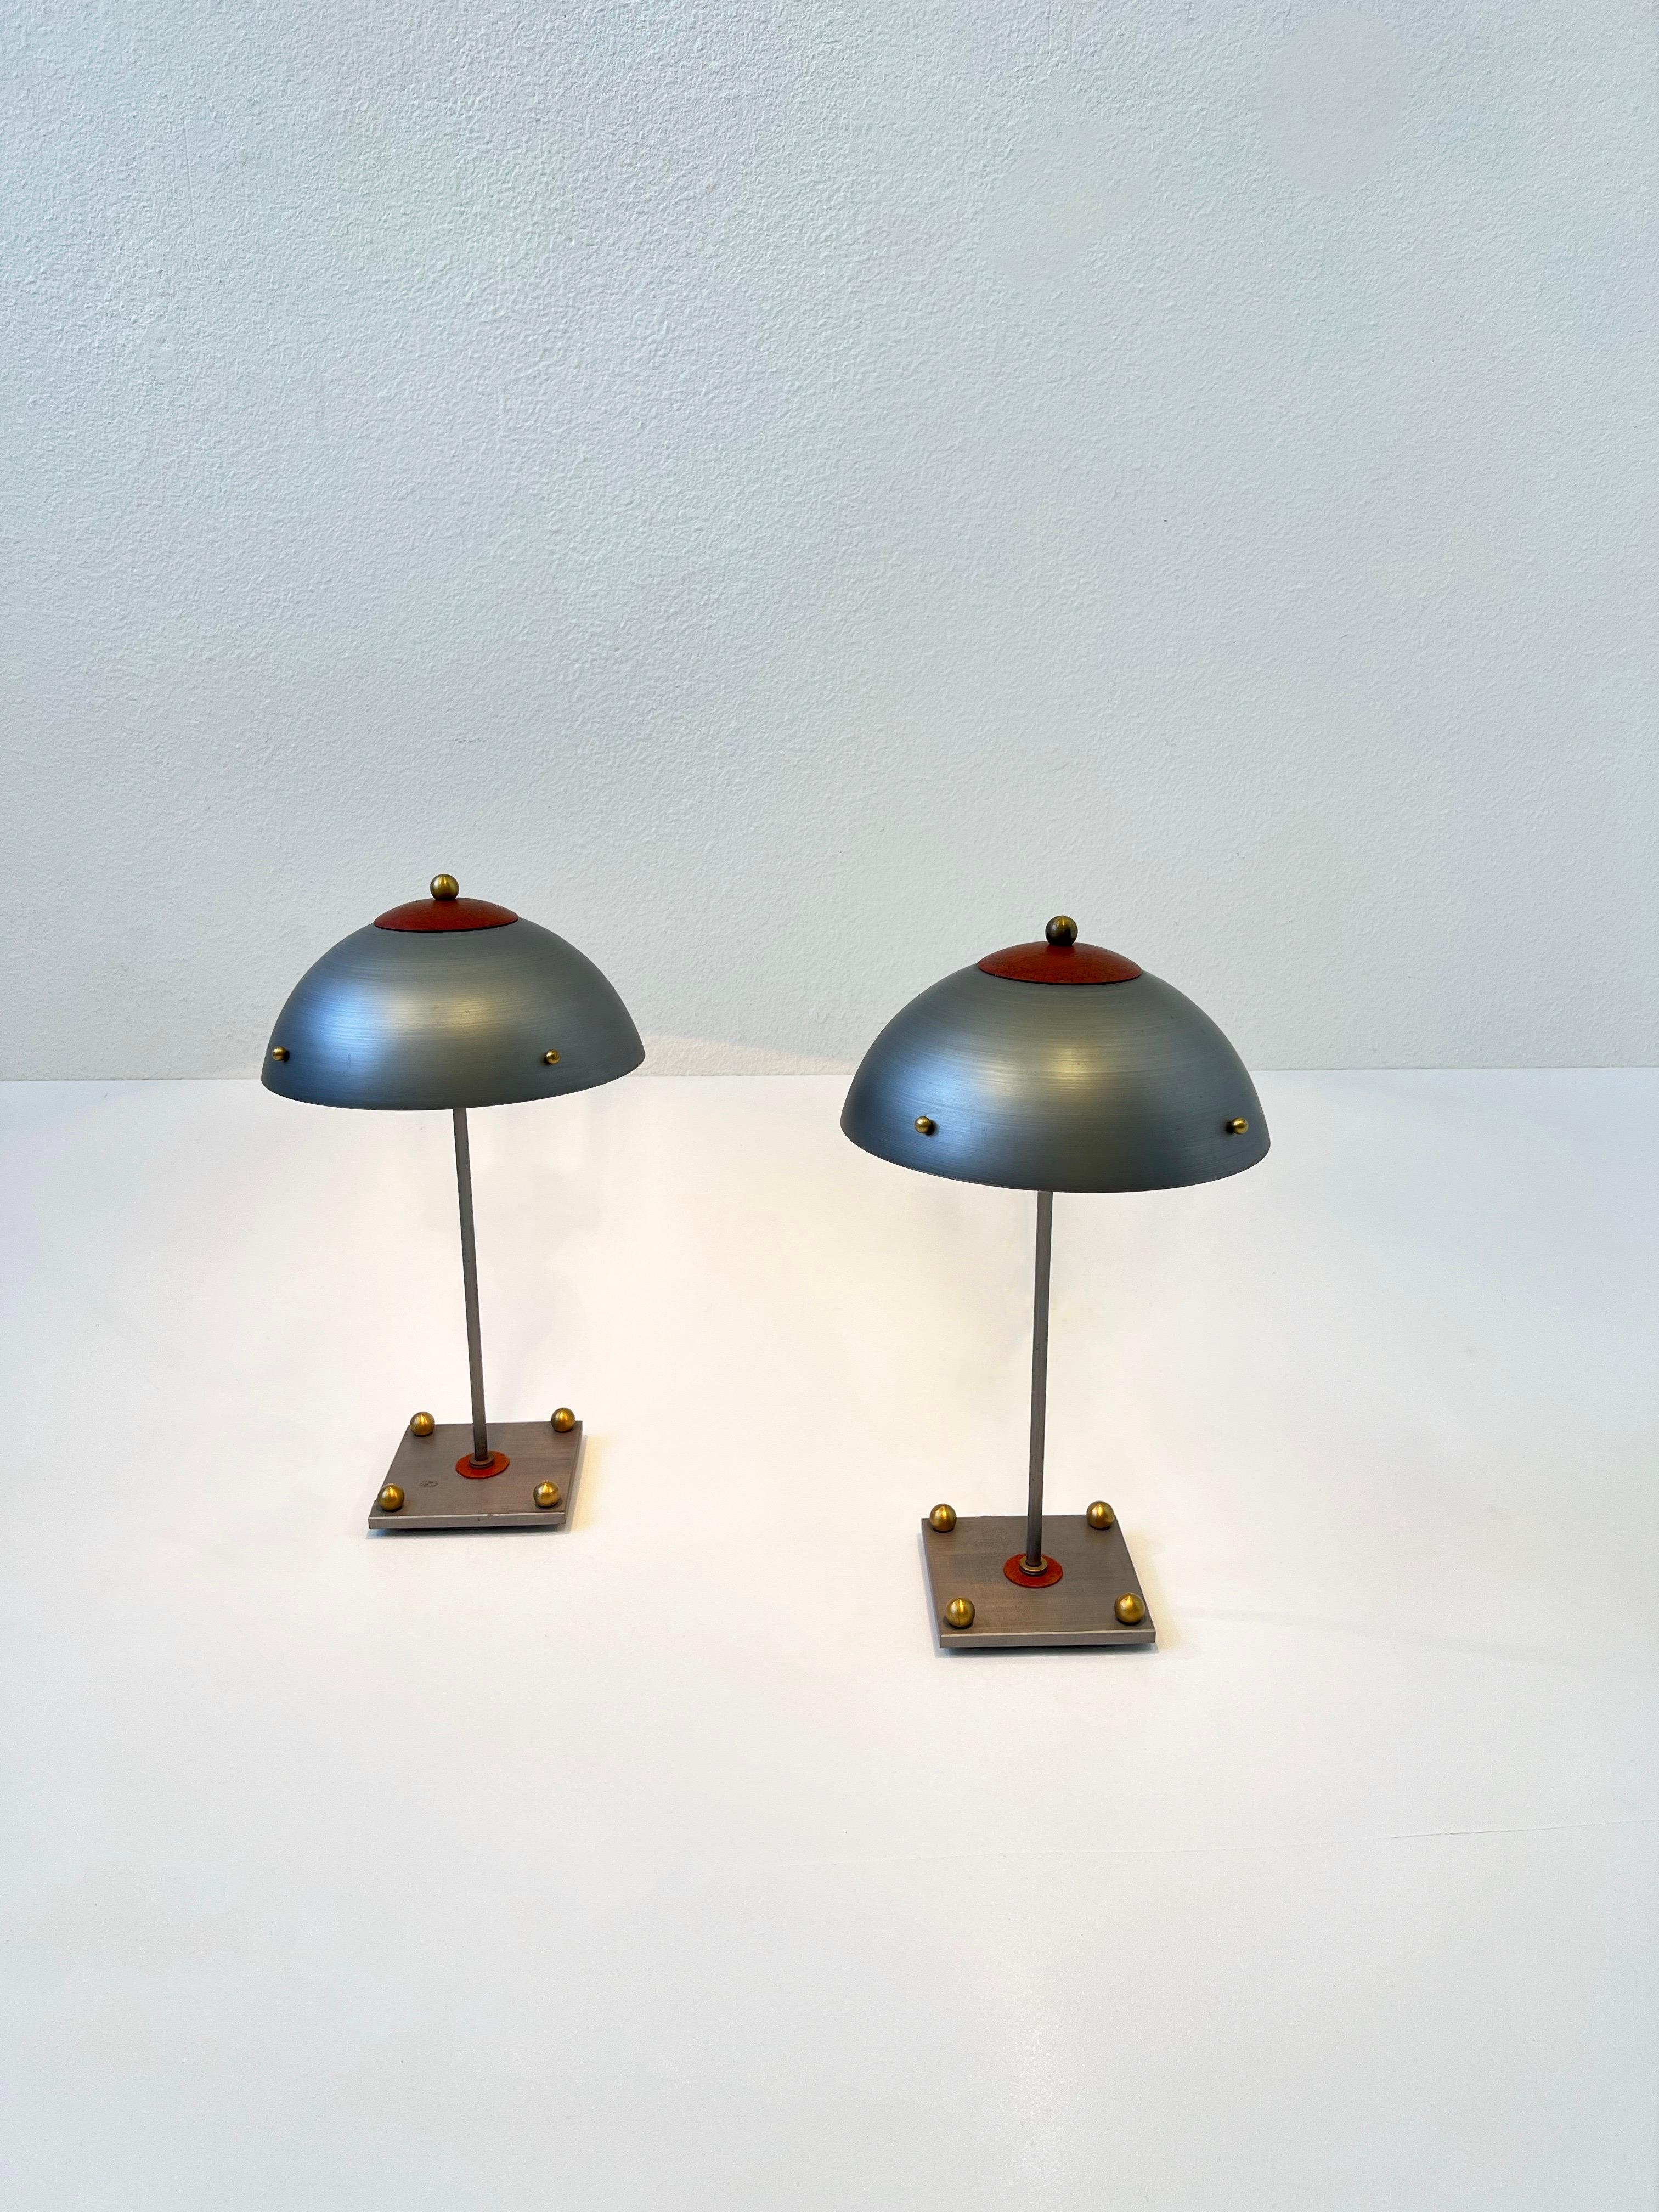 Pair of 1980’s Studio Post Modern steel and brass table Lamps by Cantor Wheat Design. 
In beautiful original vintage condition, some age spots on one. 

They have a High/Low in line dimmer and take two small 40w Max lightbulbs. 

Measurements: